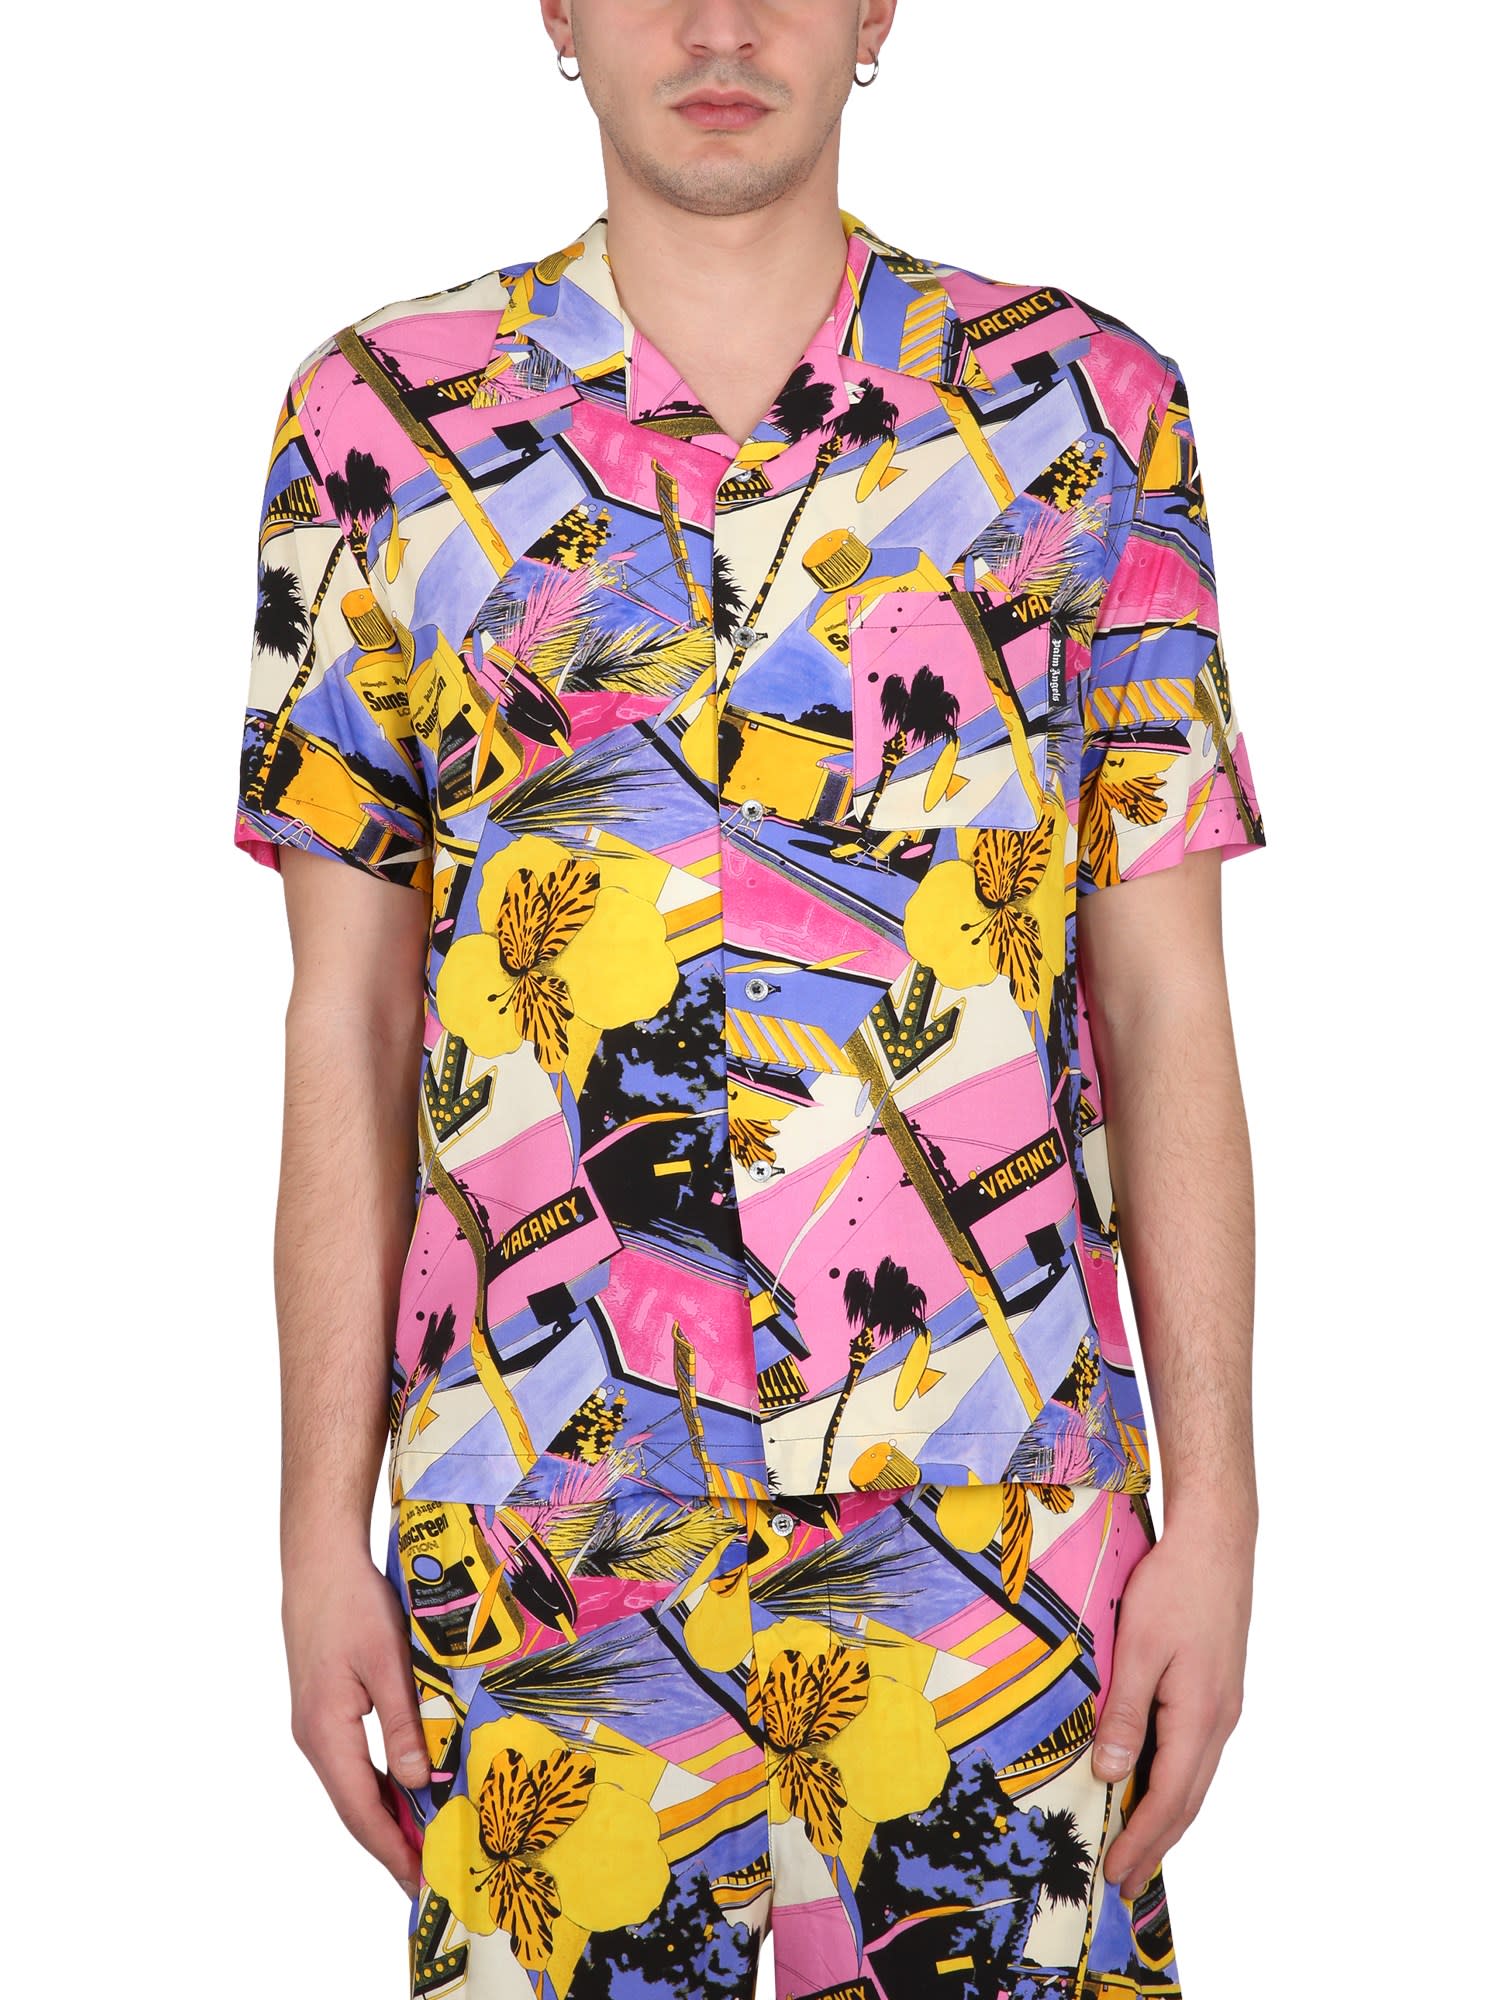 Palm Angels Bowling Style Shirt With Miami Mix Print